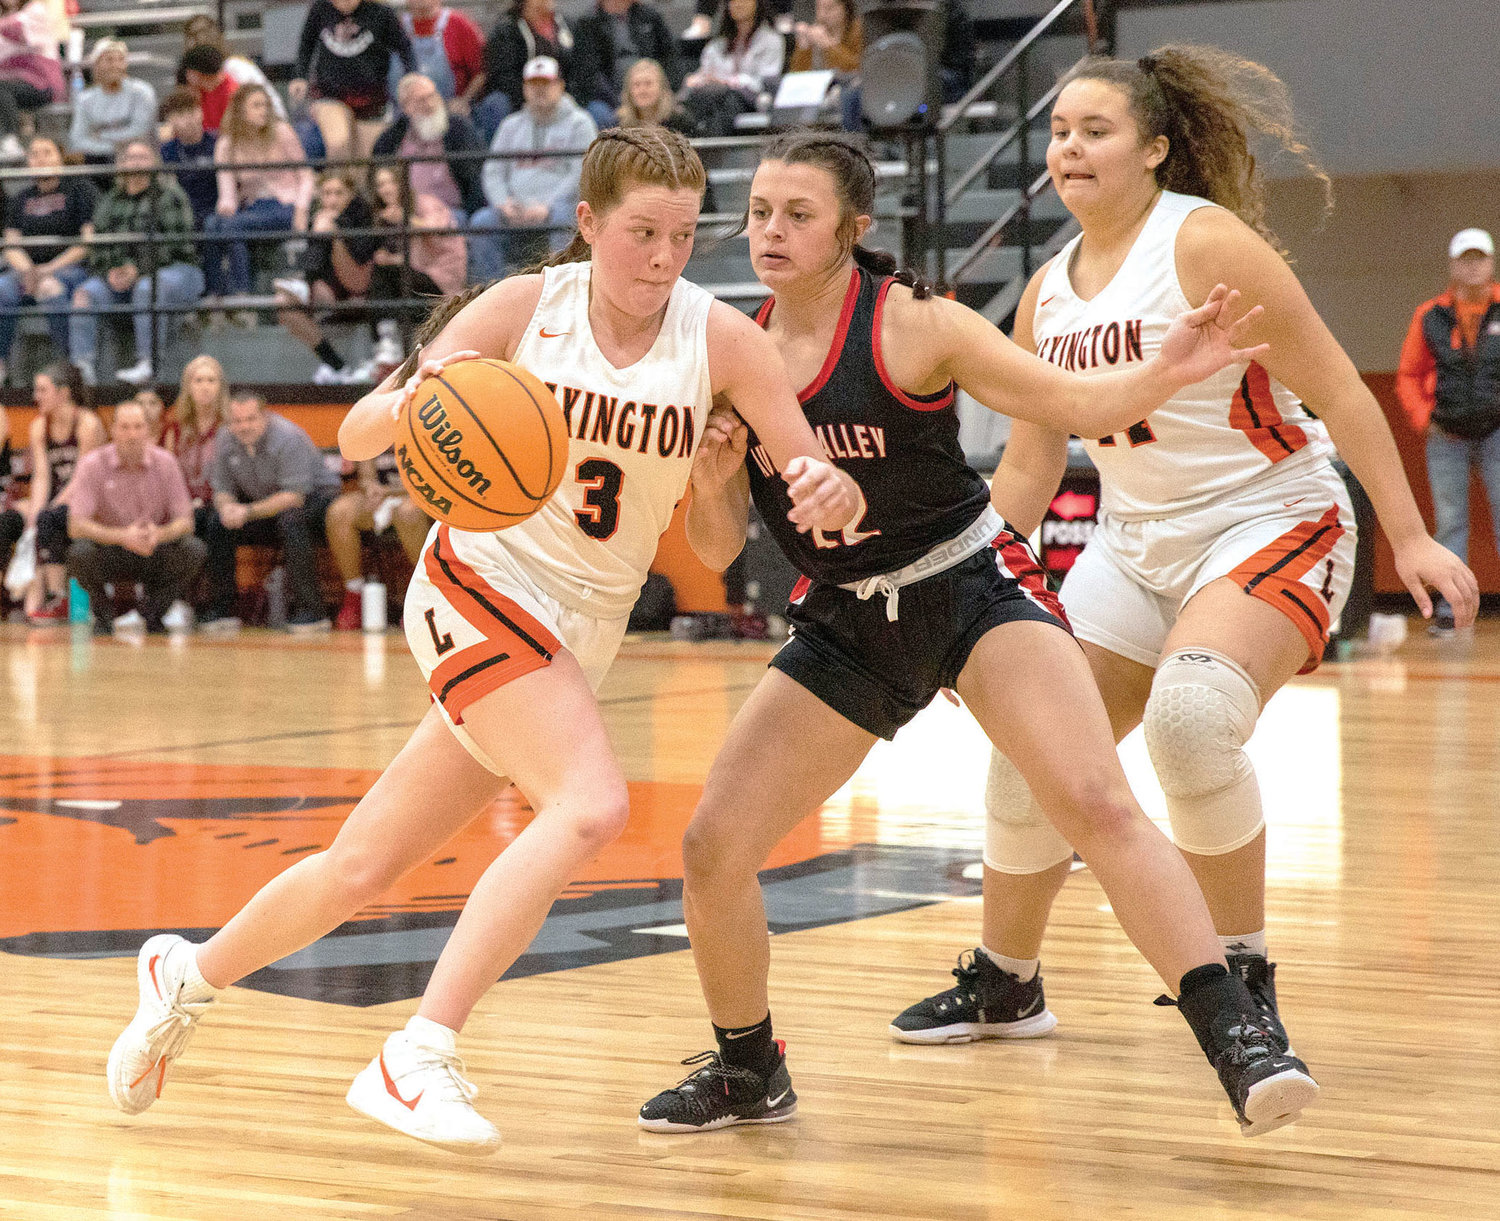 Lexington junior Rylee Beason (3) dribbles by a Pauls Valley defender while sophomore Kiely Givens (44) looks on. Lexington plays at Prague Friday at 6:30 p.m. in the District tournament.